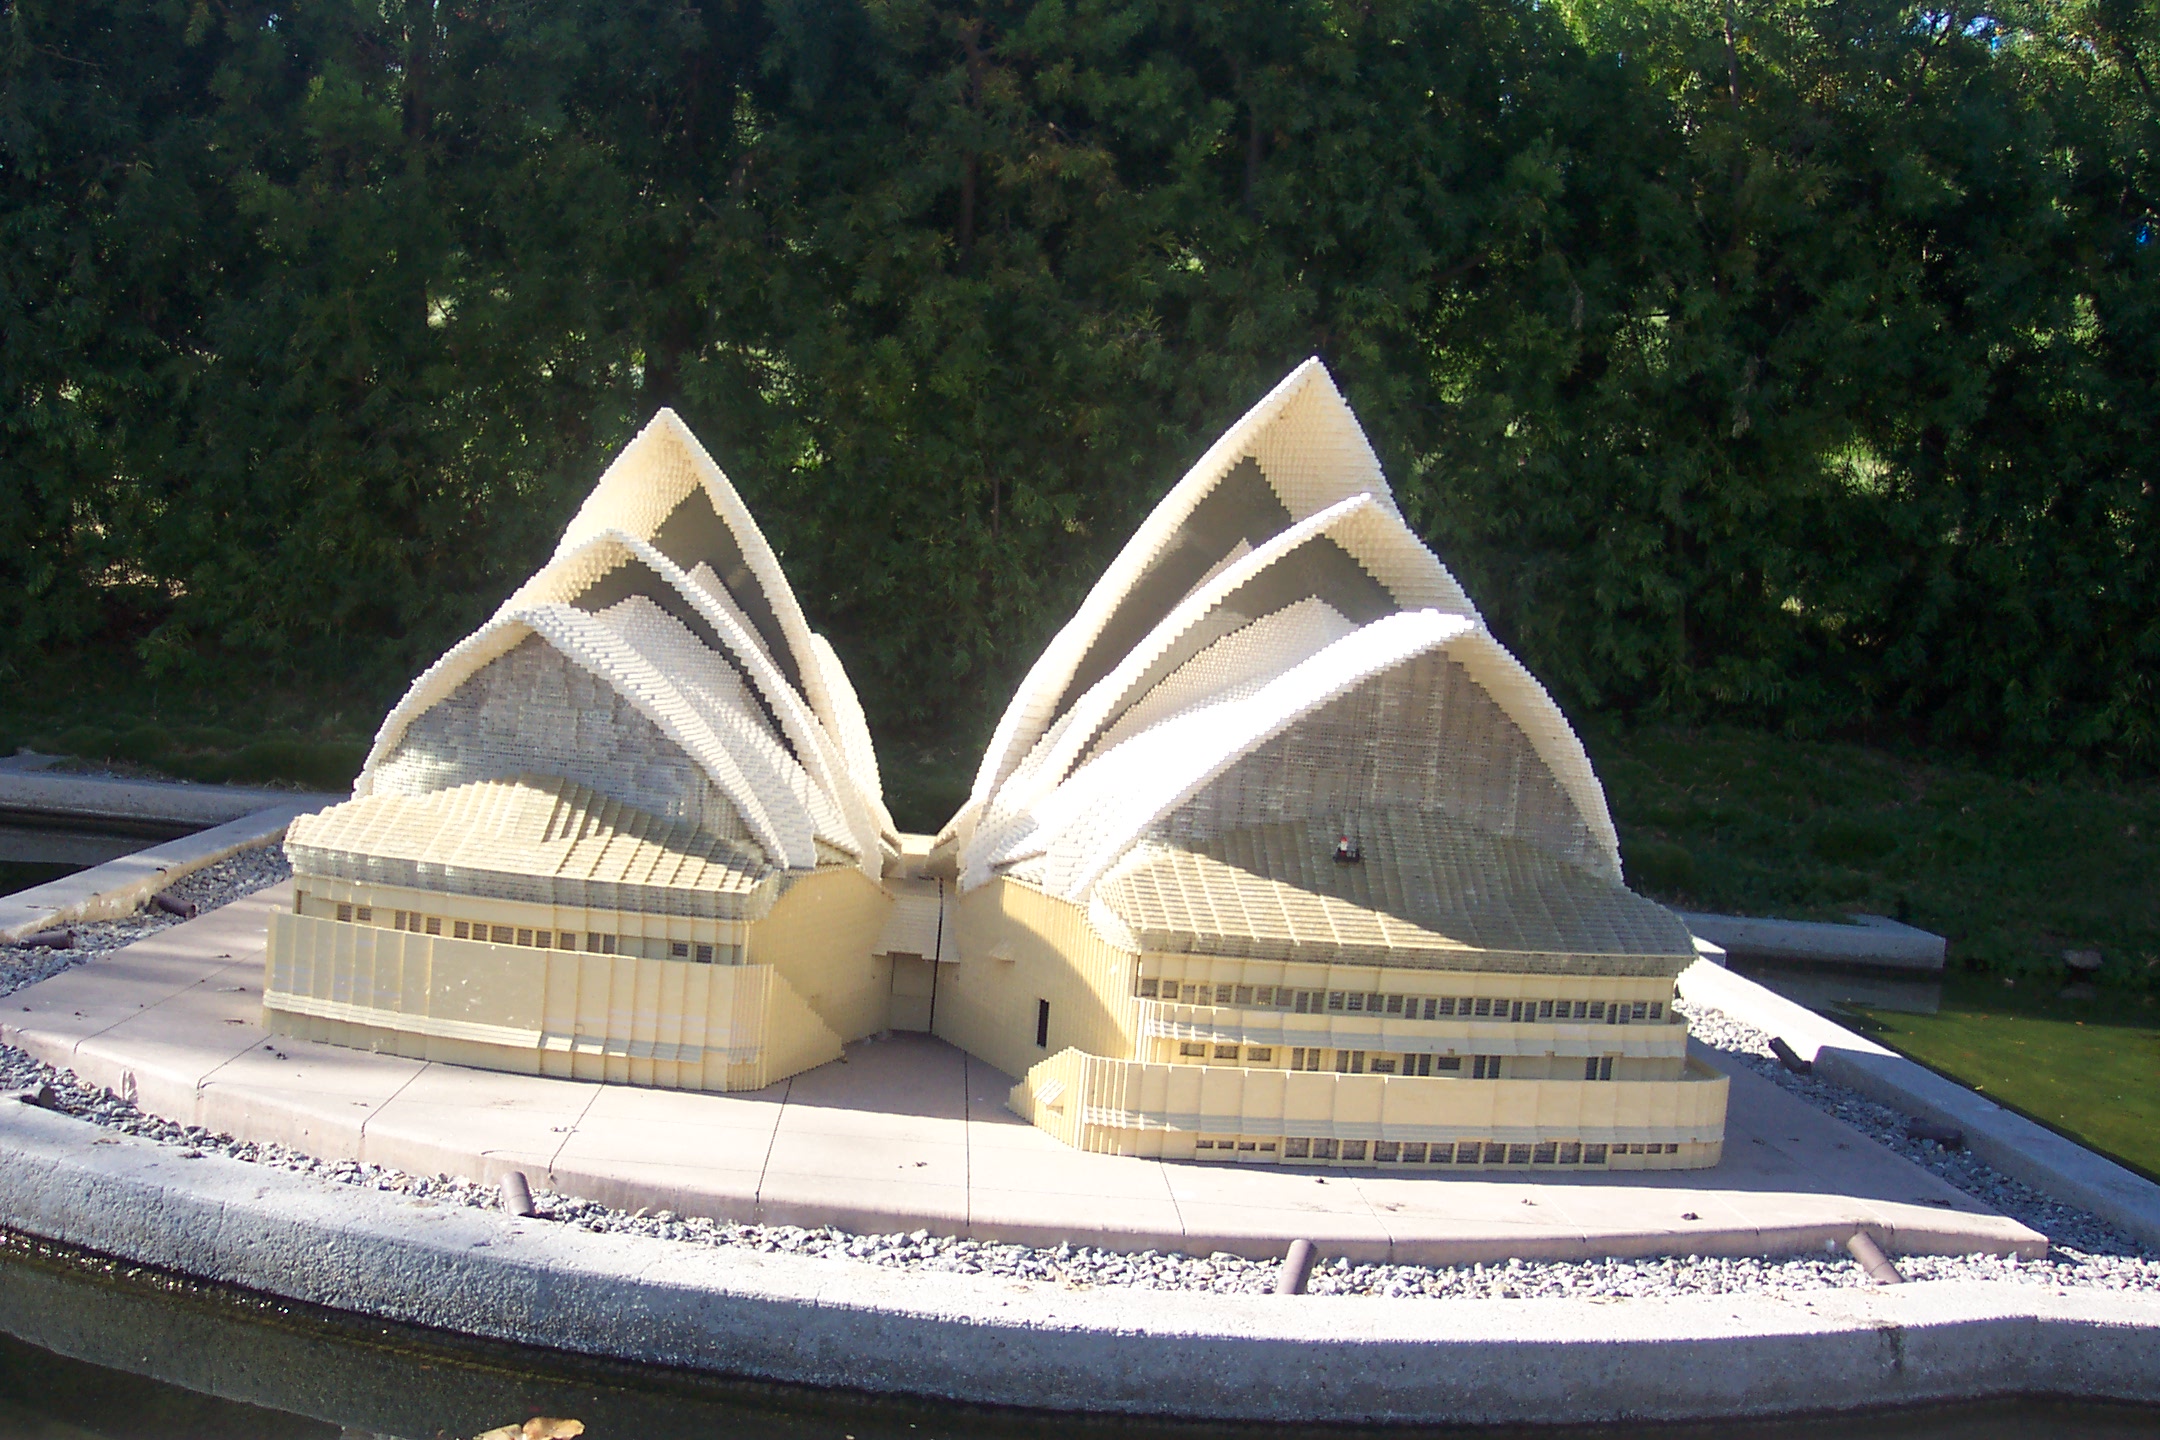 The opera house in Sydney in lego